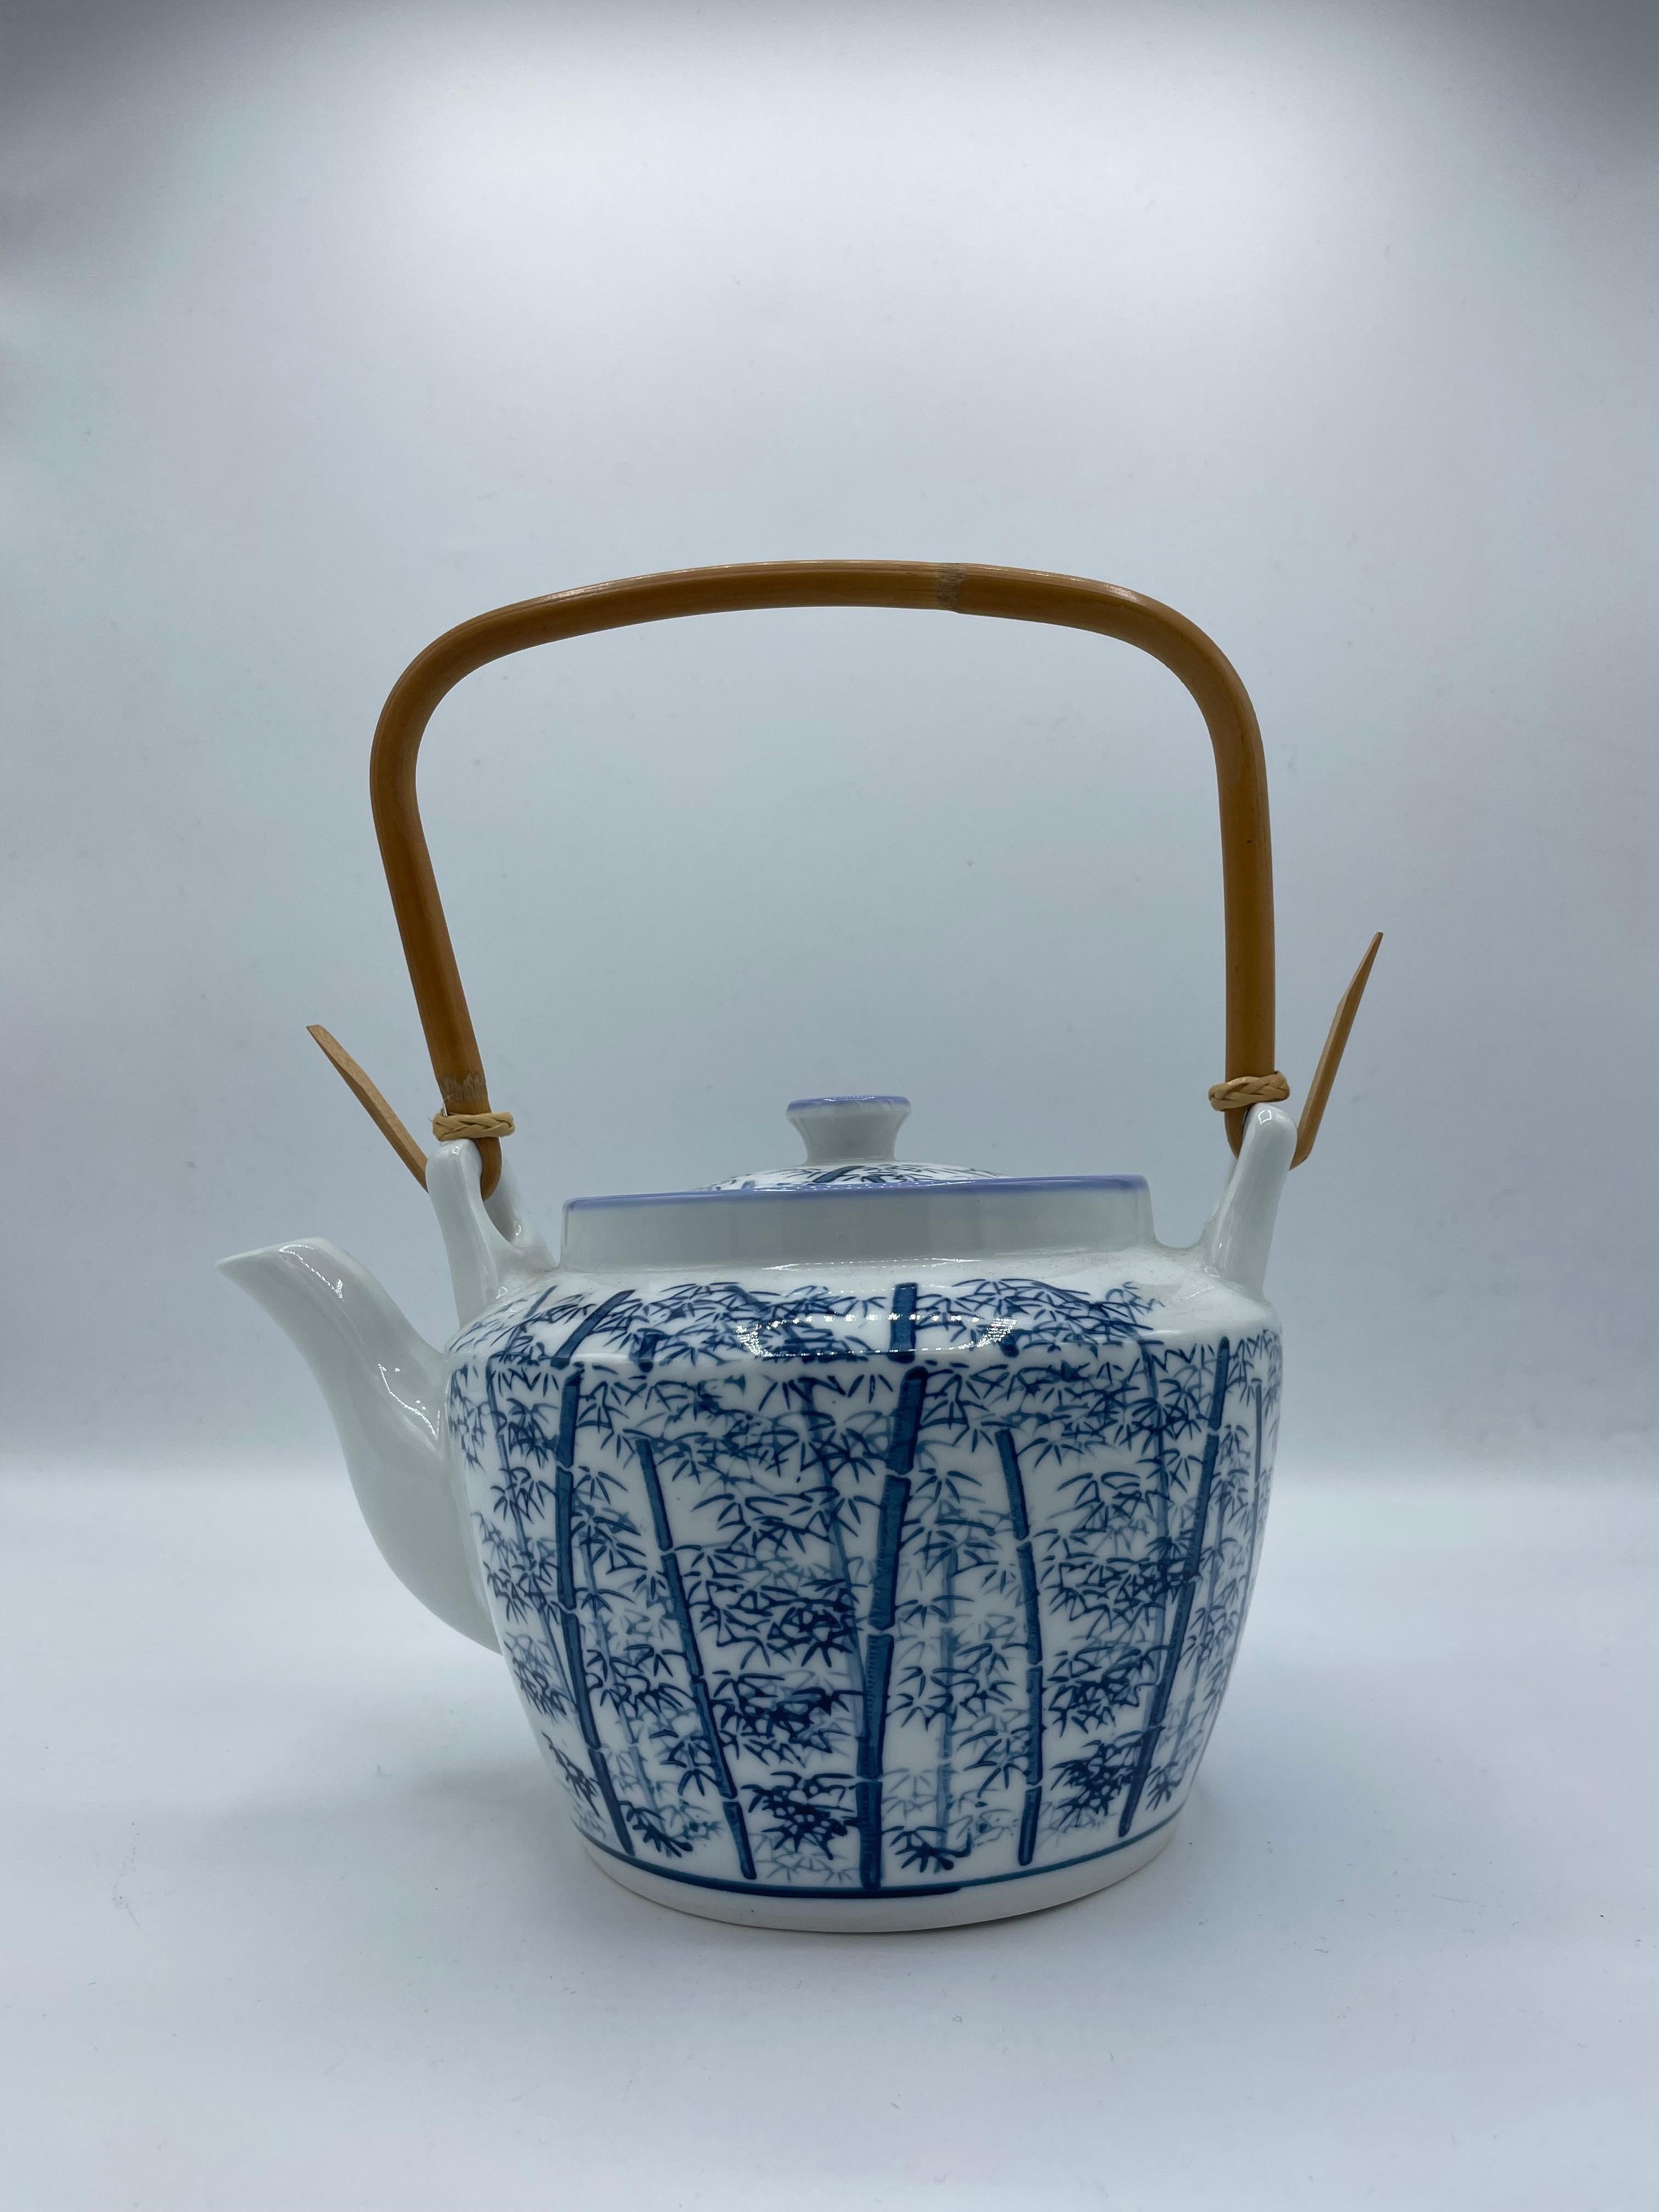 This is a Japanese Tea Pot made around 1960s in Showa era.
It is made with porcelain and the wrist is made with wood and bamboo.

Dimensions:
20.5 x 16 x H 25
Wrist length  11 cm